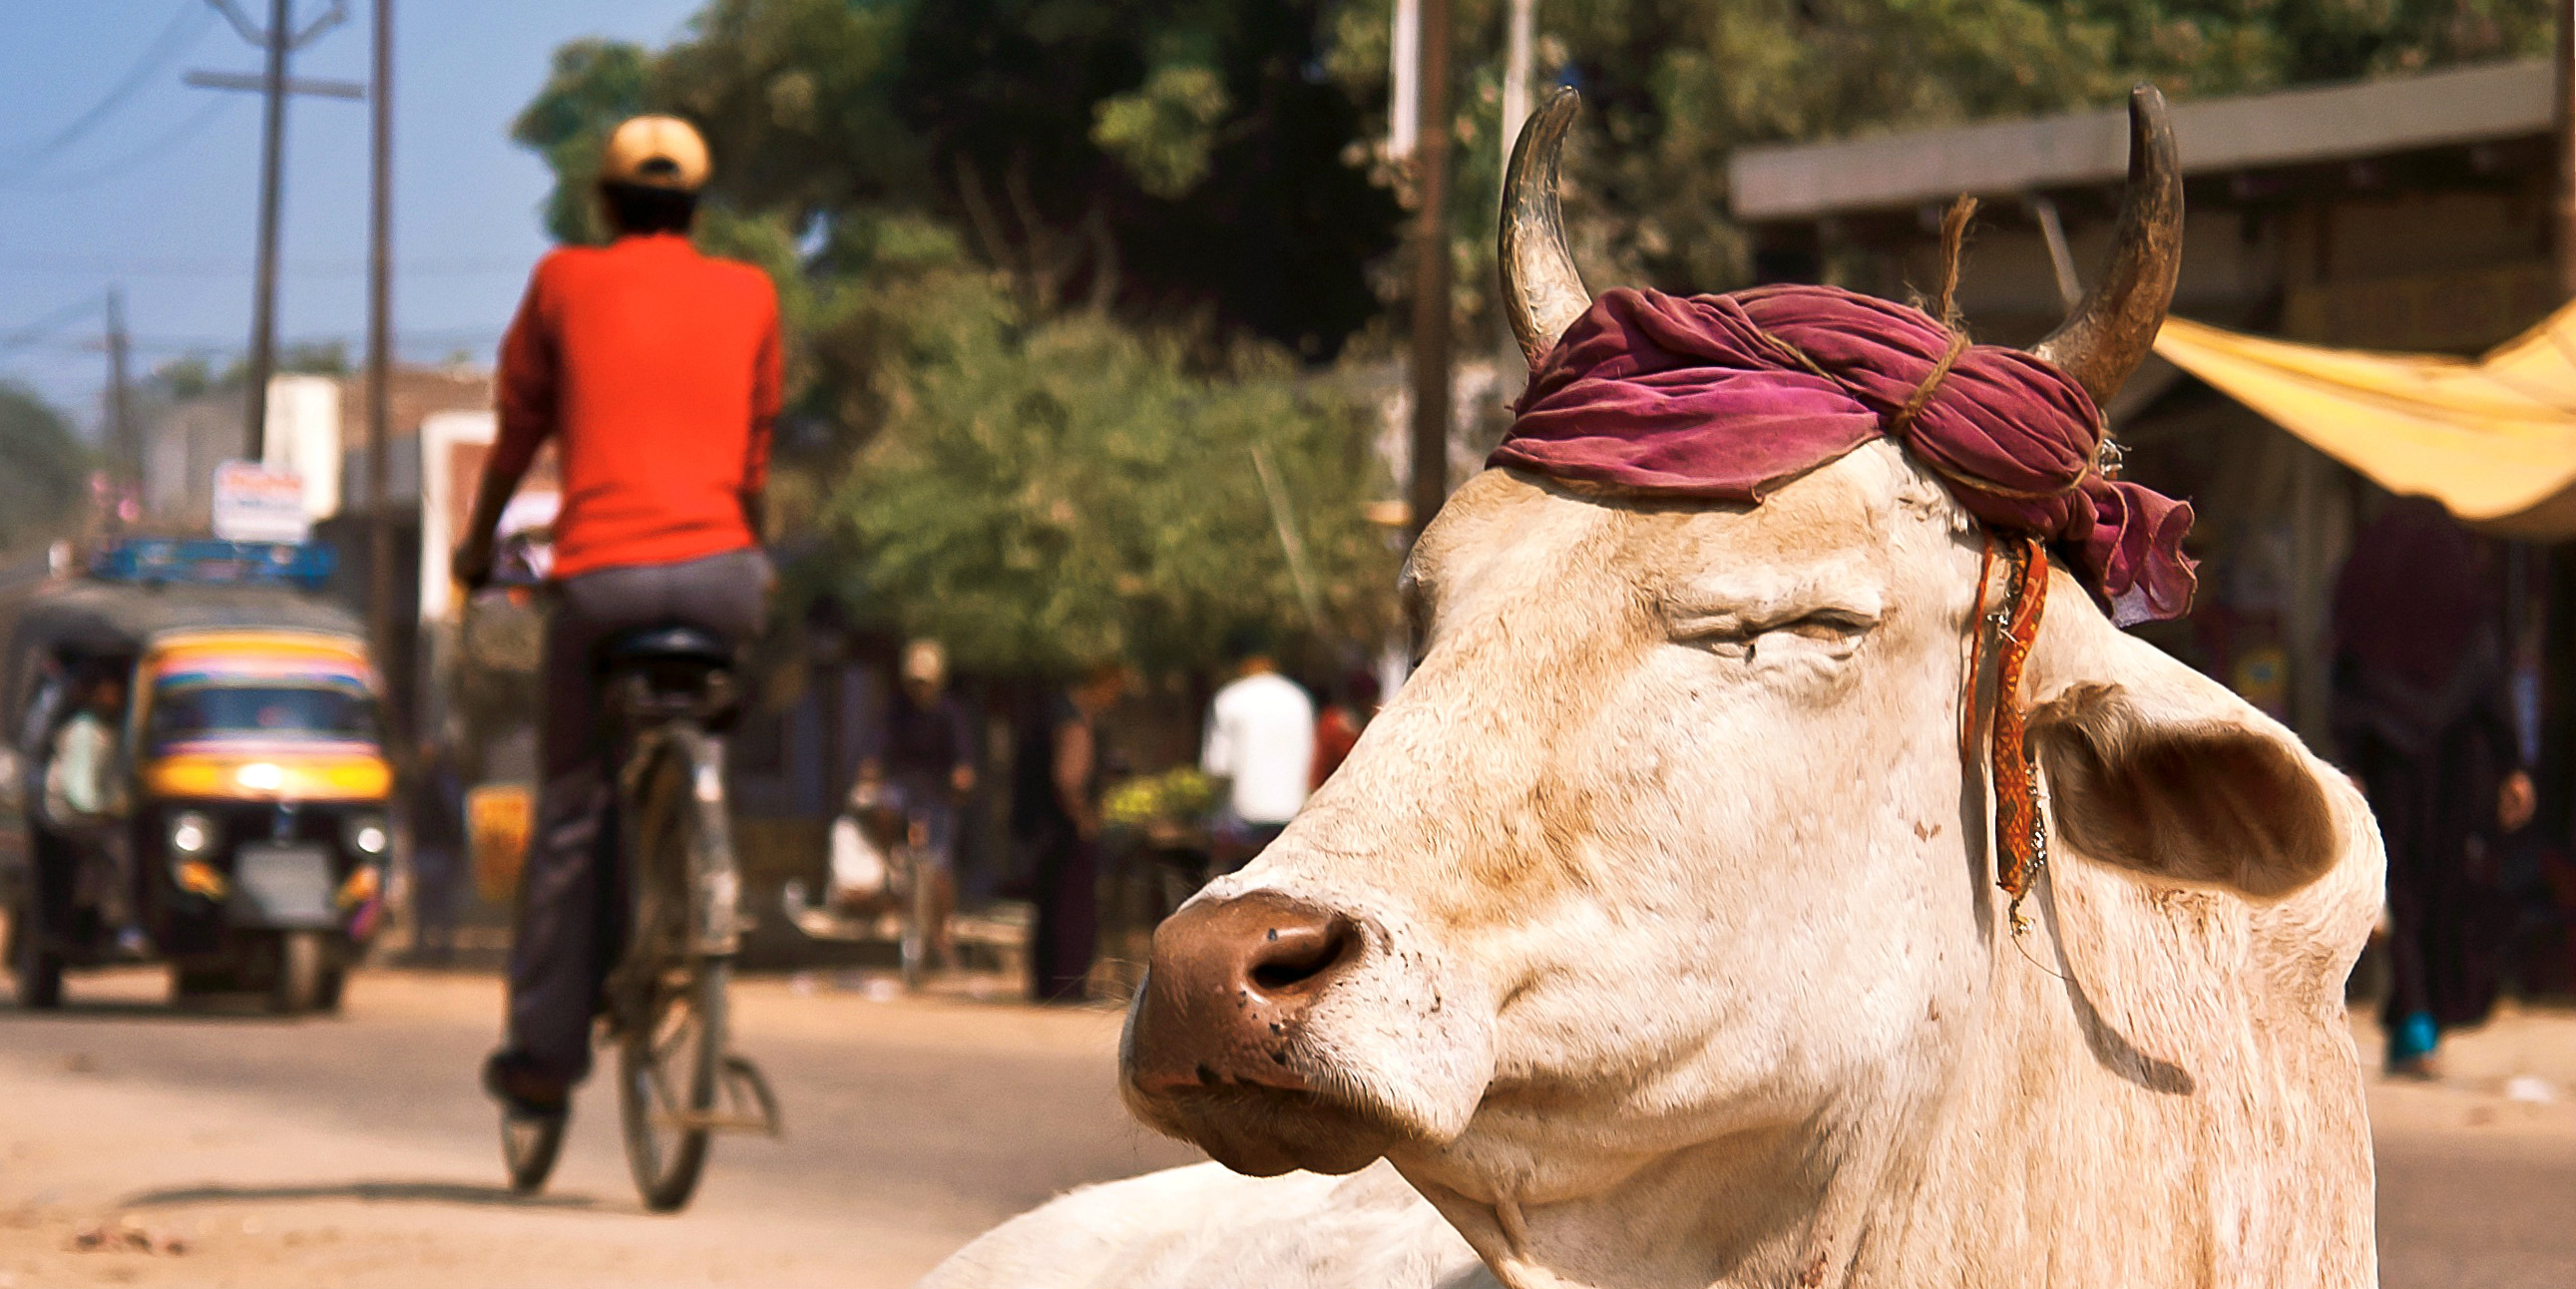 Travel in India and you might come across cows like this, roaming freely in the streets.